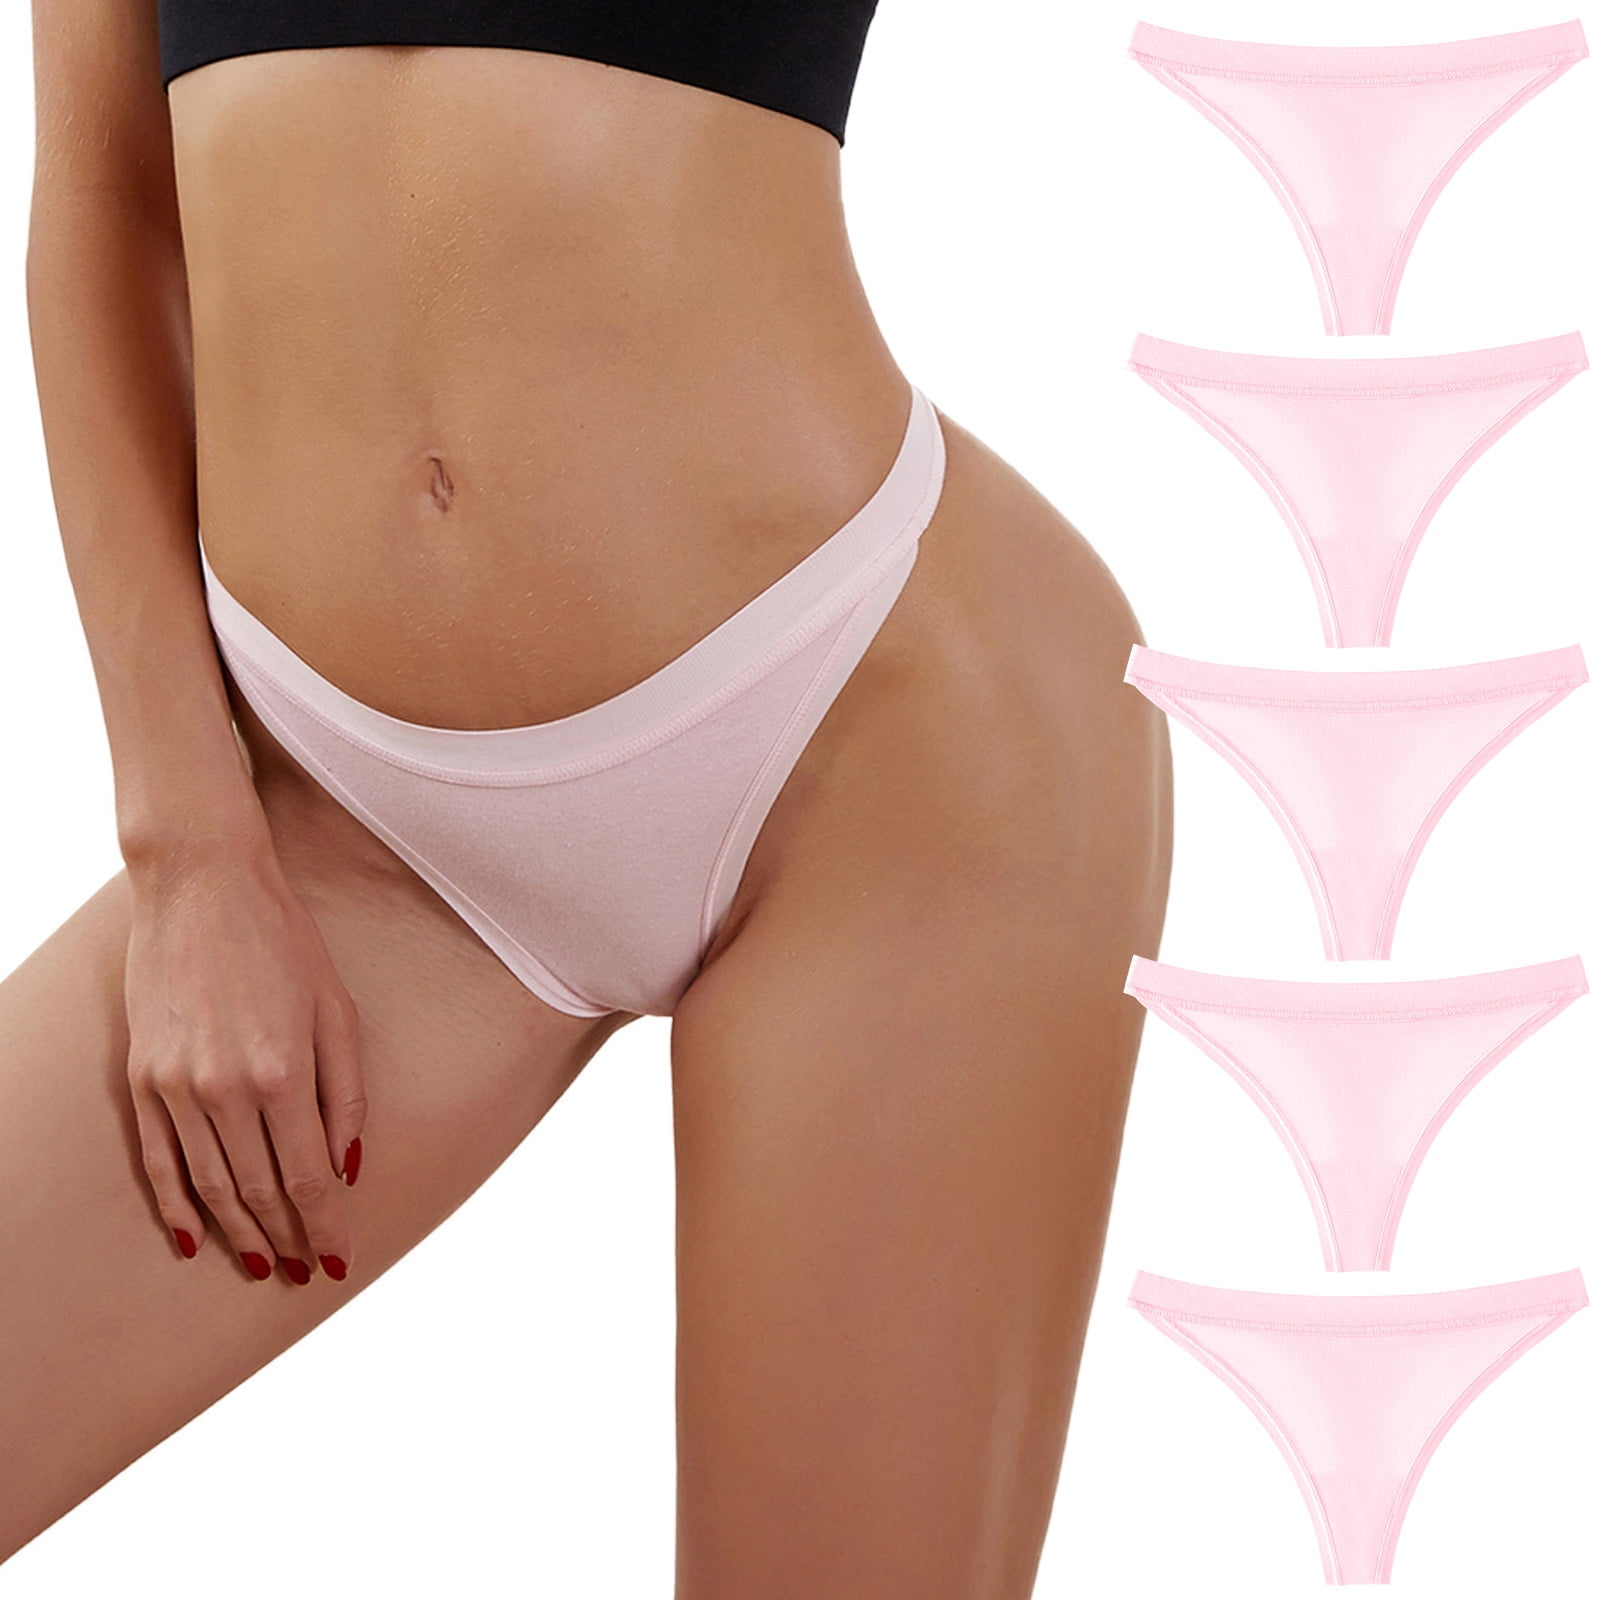 Buy Buankoxy 6 Pack Women's Cotton Underwear High Waist Full Briefs Ladies  Stretch Panties(5,Multi Colors) at